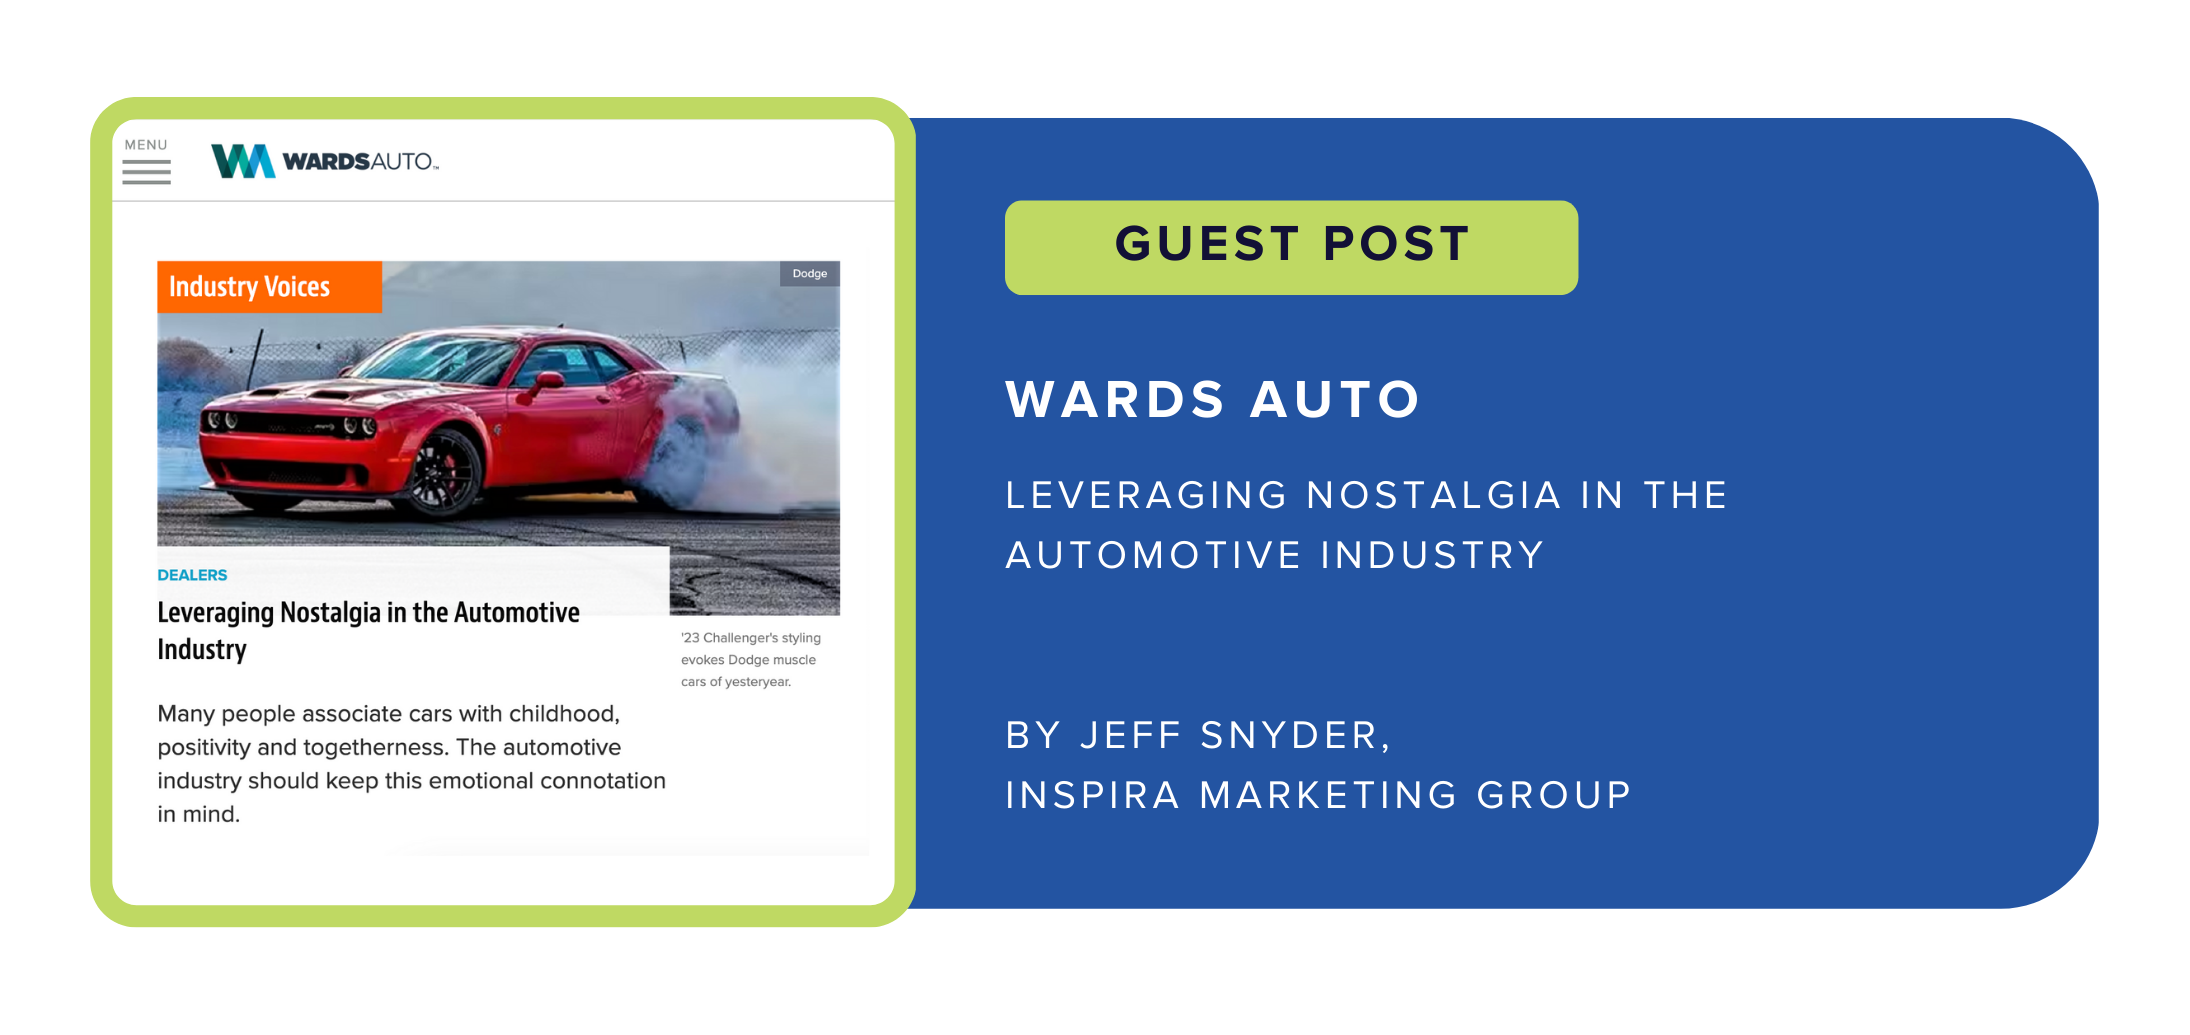 Guest Post in Wards Auto: "Leveraging Nostalgia in the Automotive Industry" by Jeff Snyder, Inspira Marketing Group